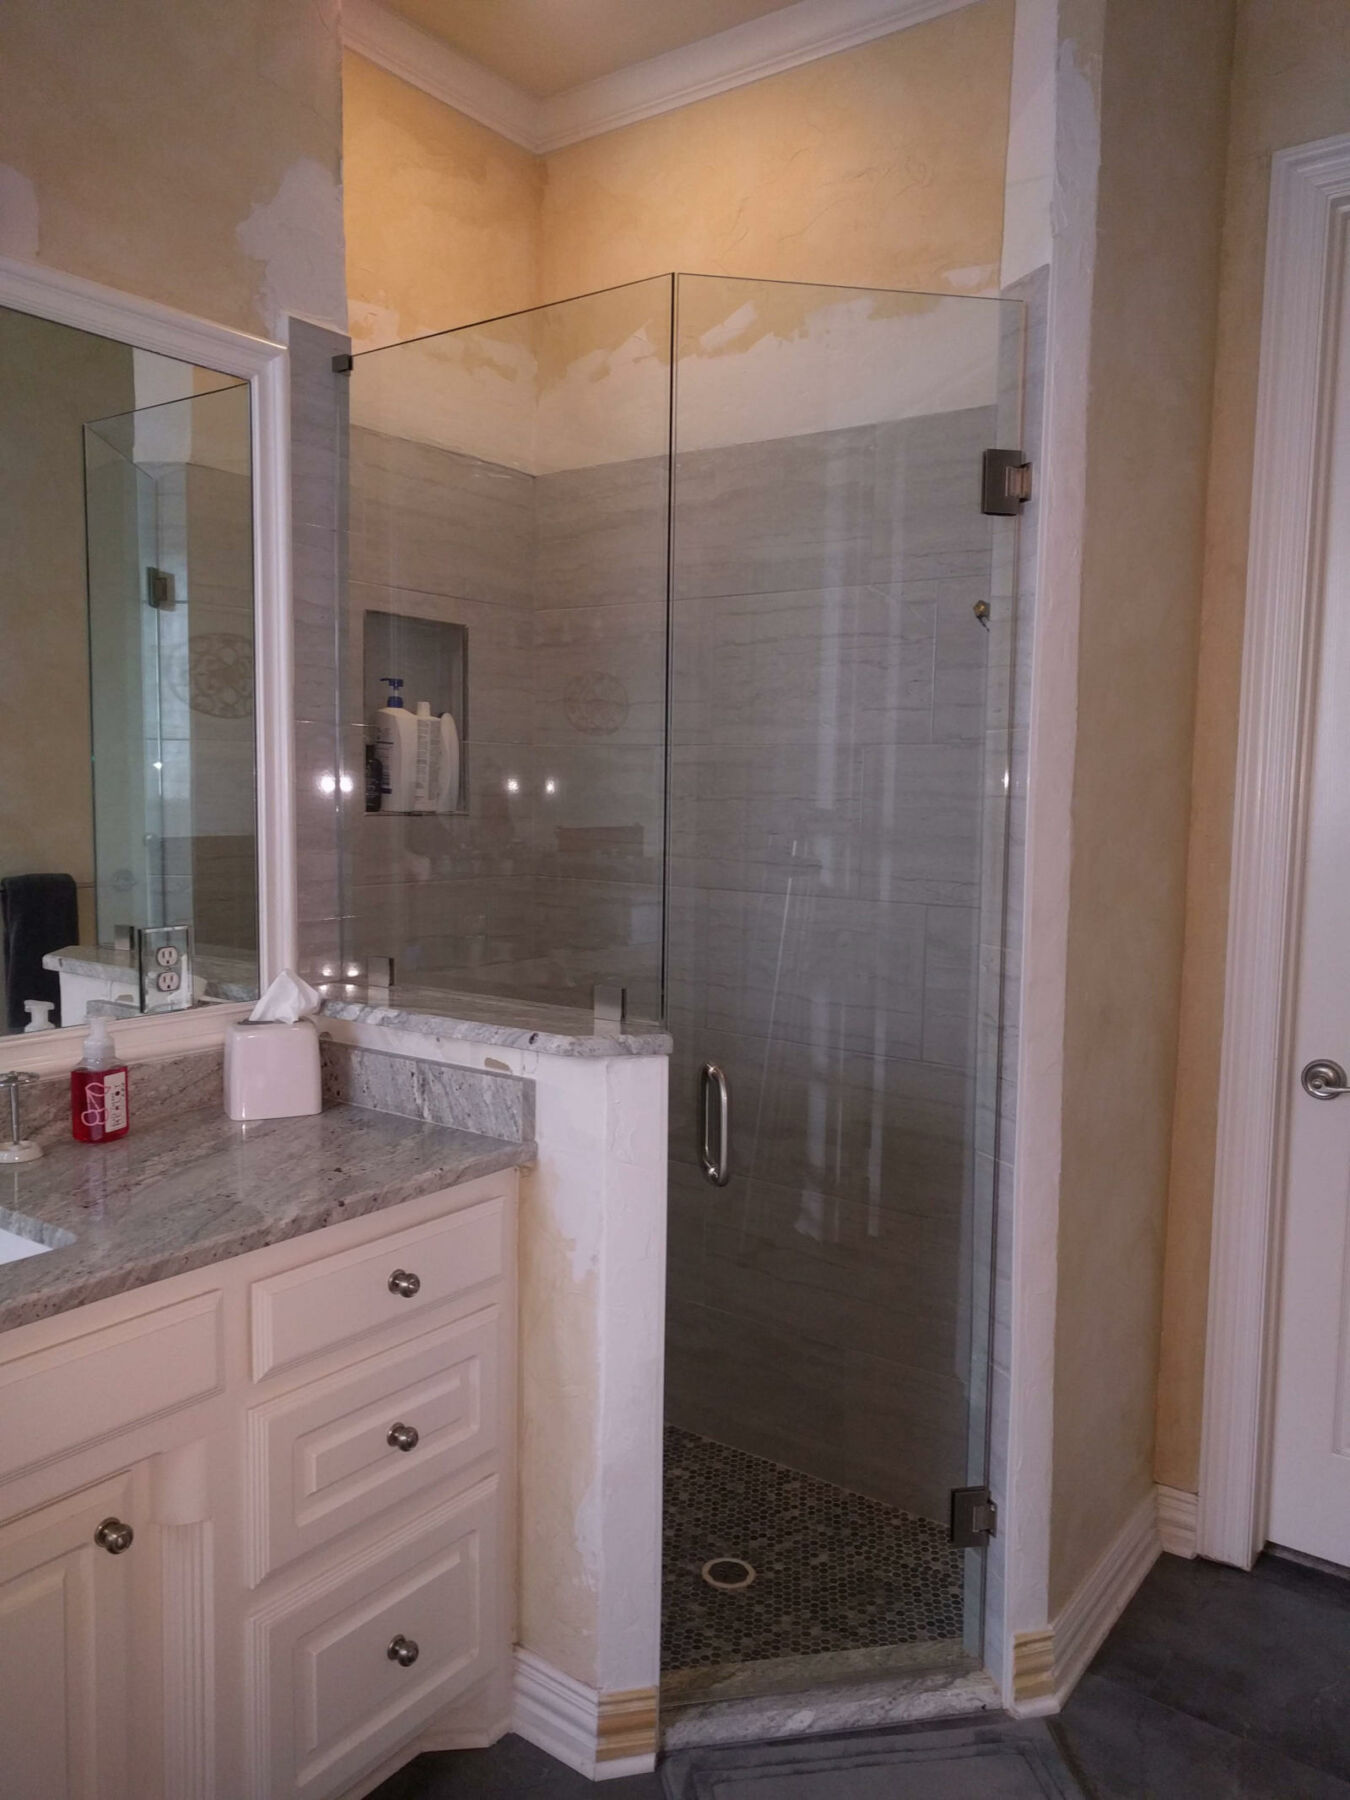 shower glass door for small space